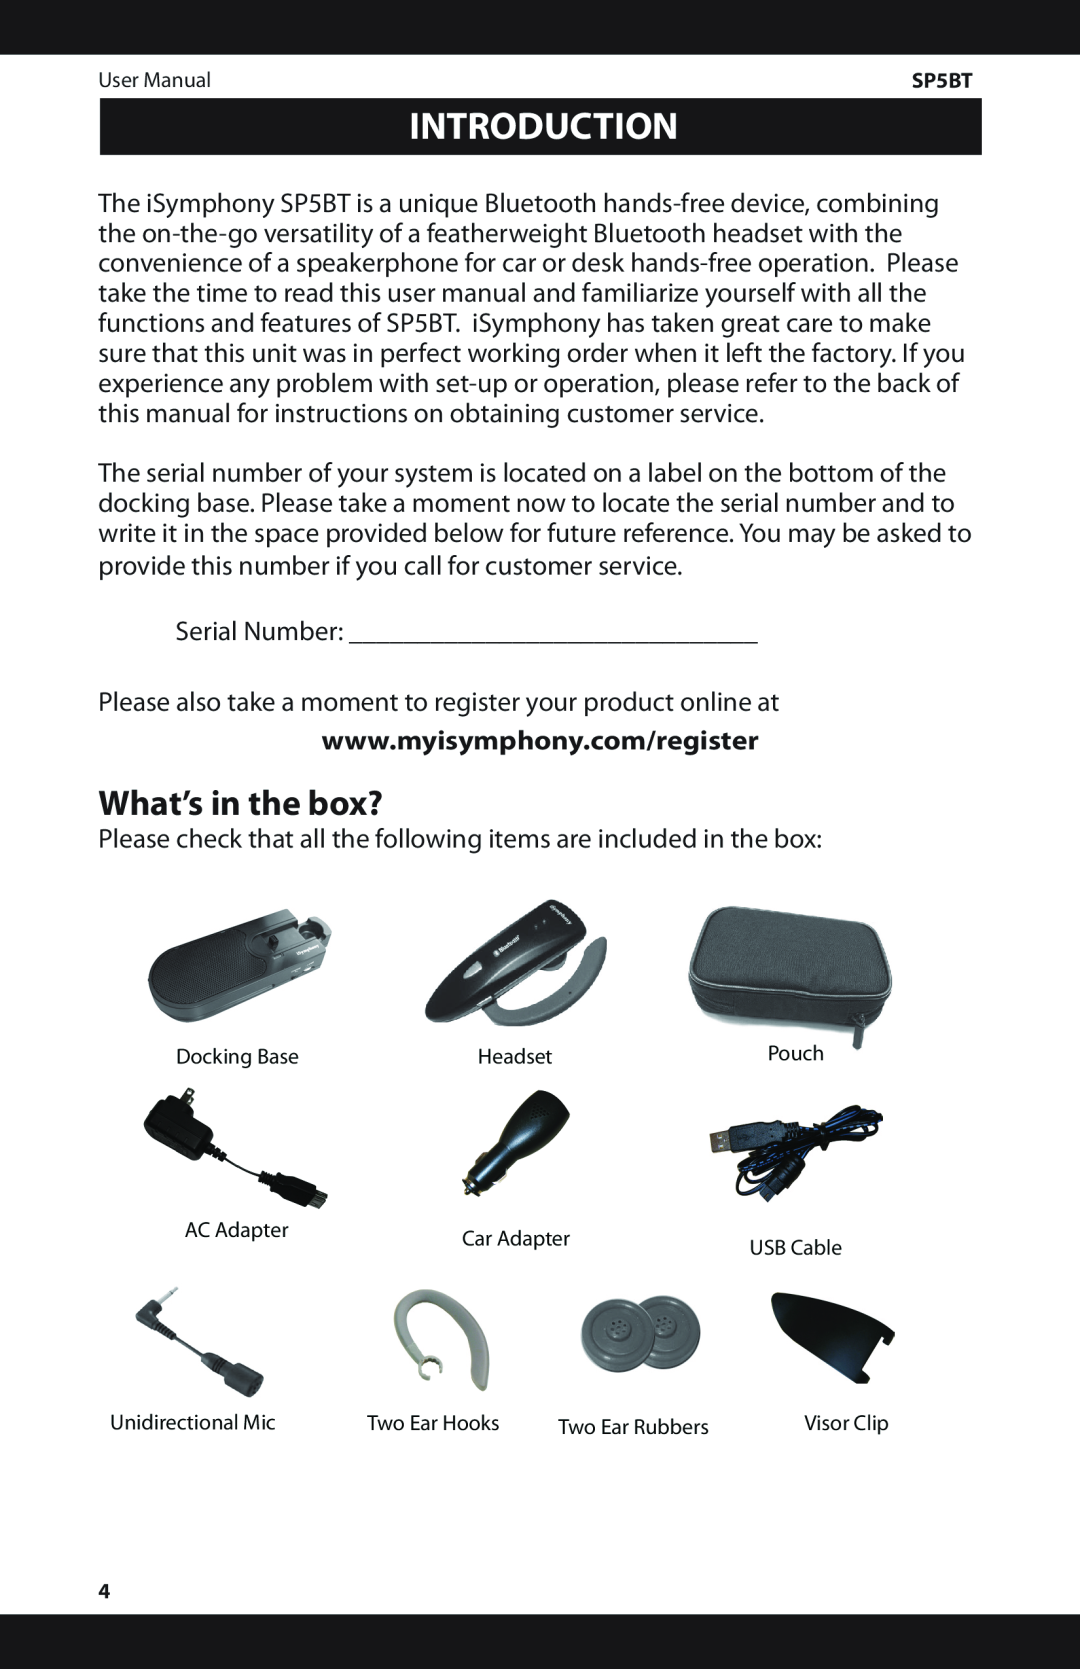 iSymphony SP5BT user manual Introduction, What’s in the box? 